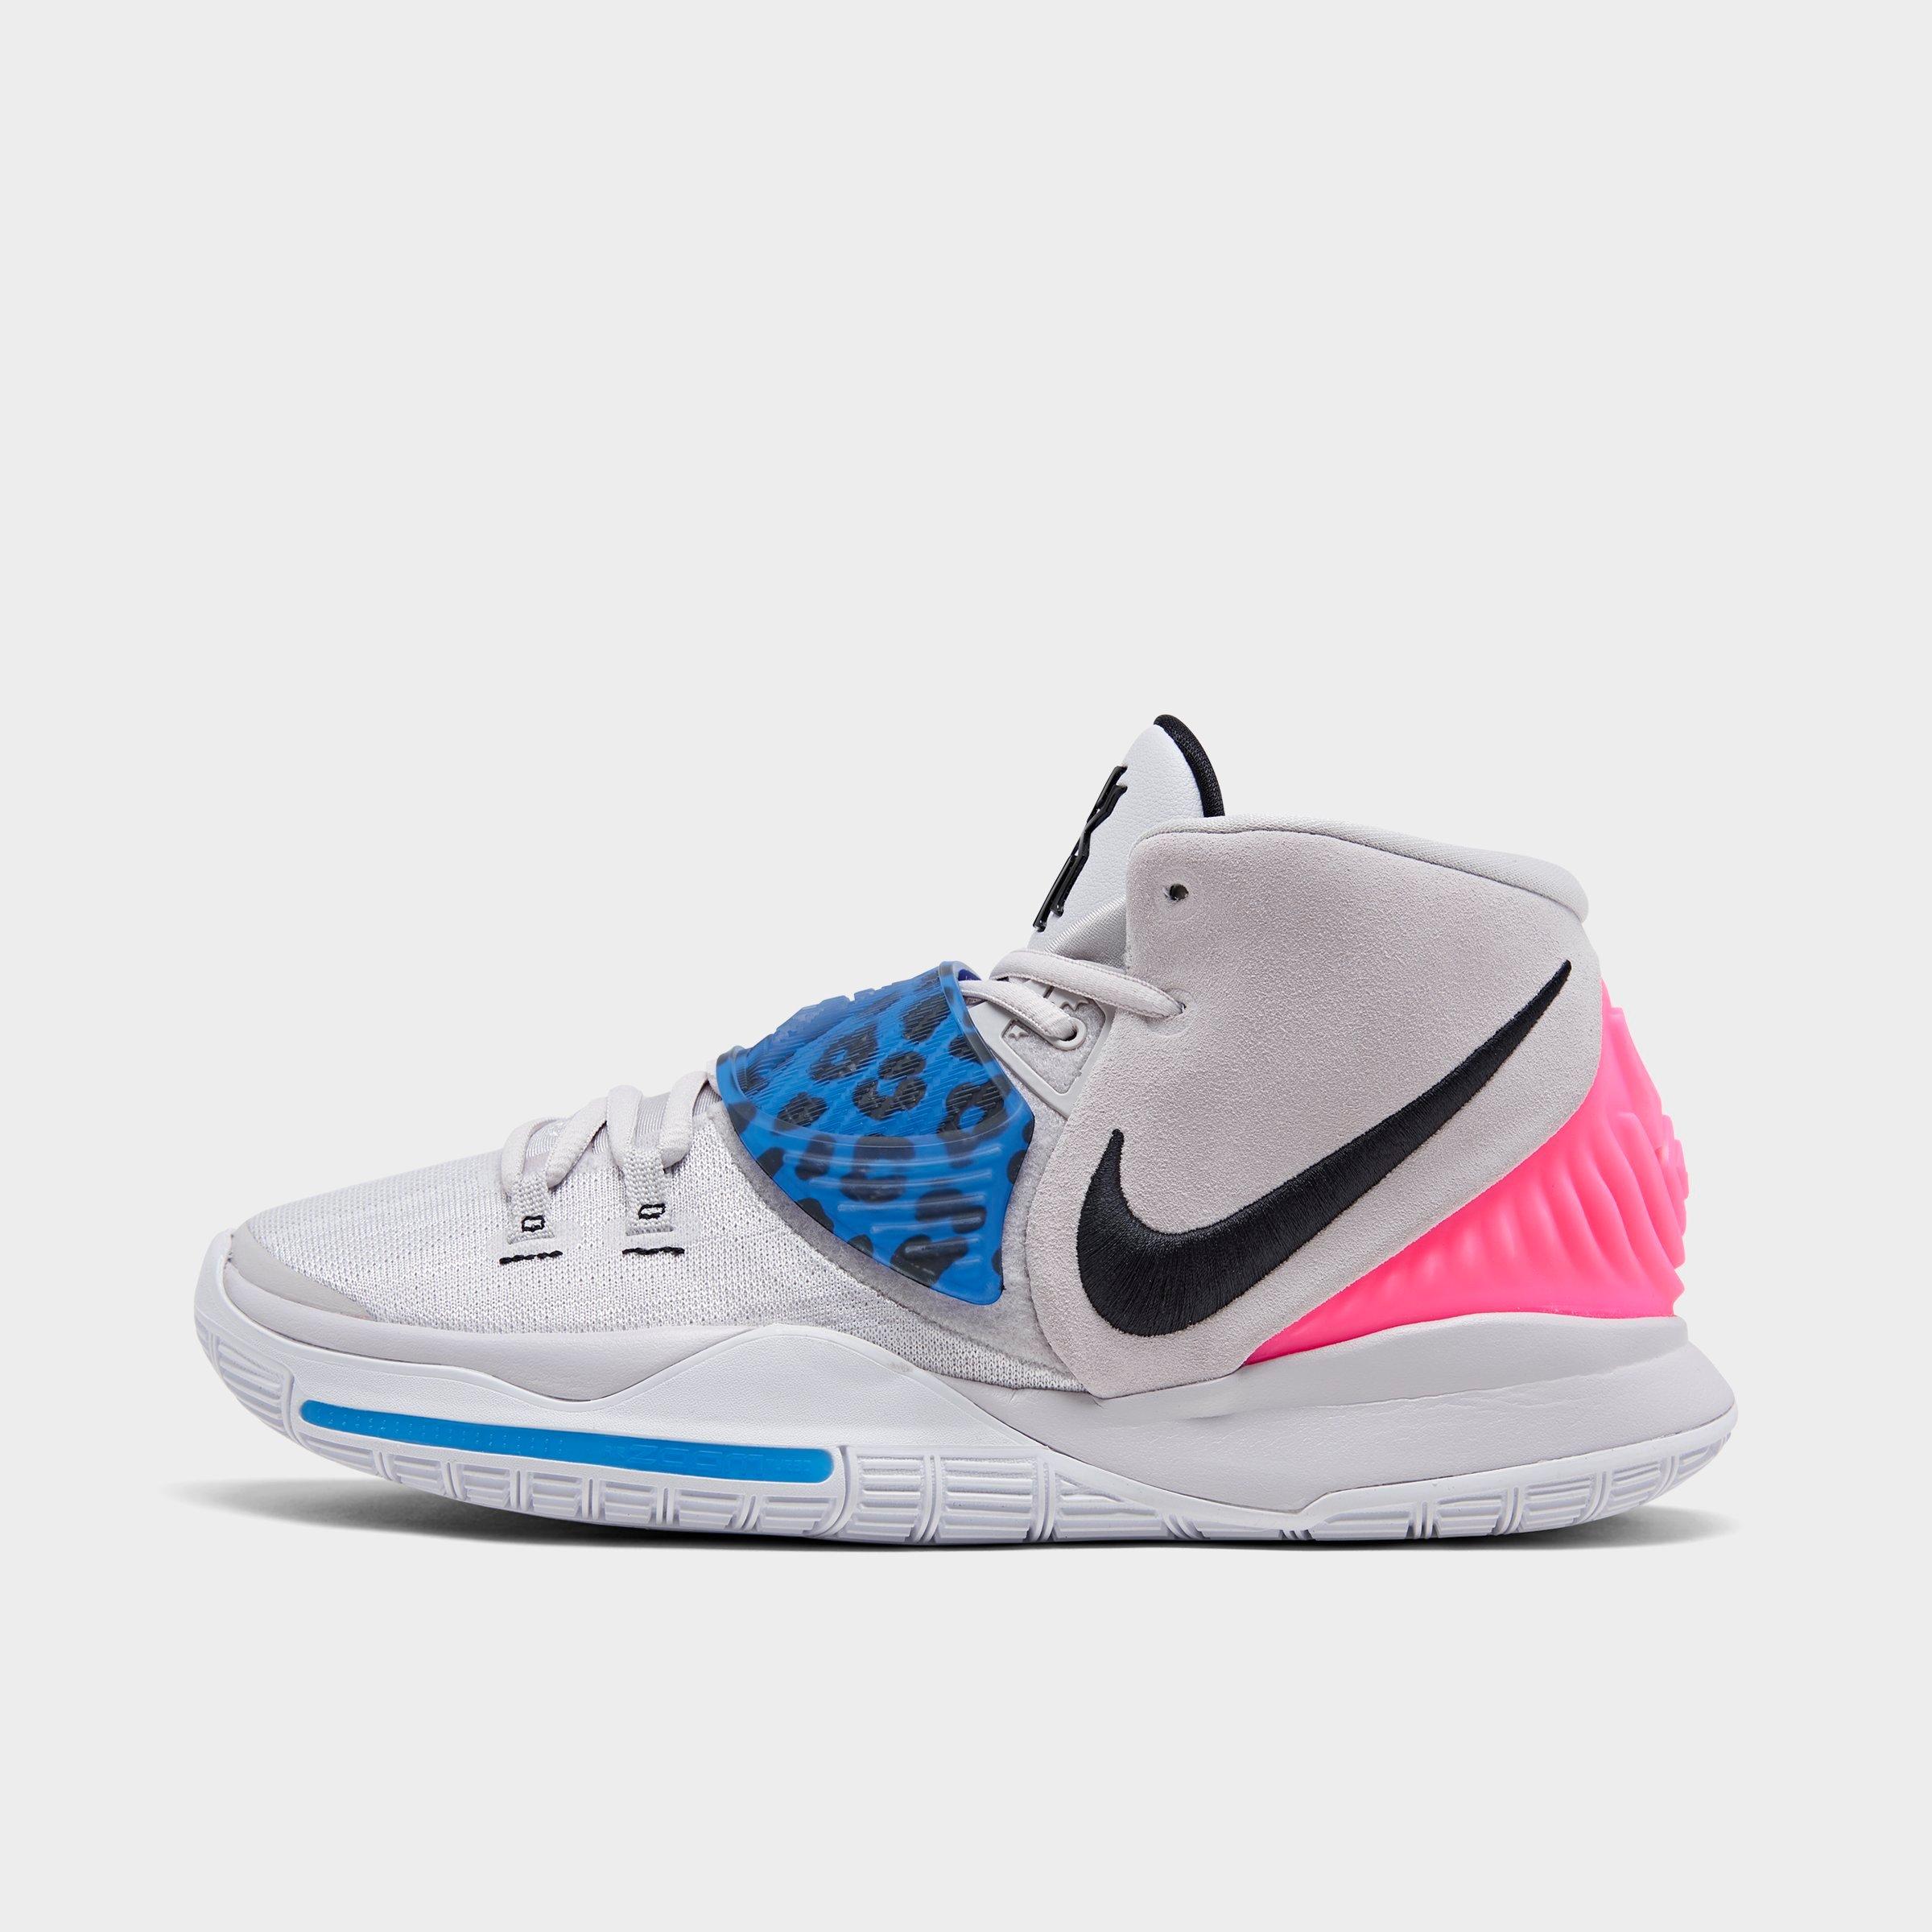 kyrie bball shoes